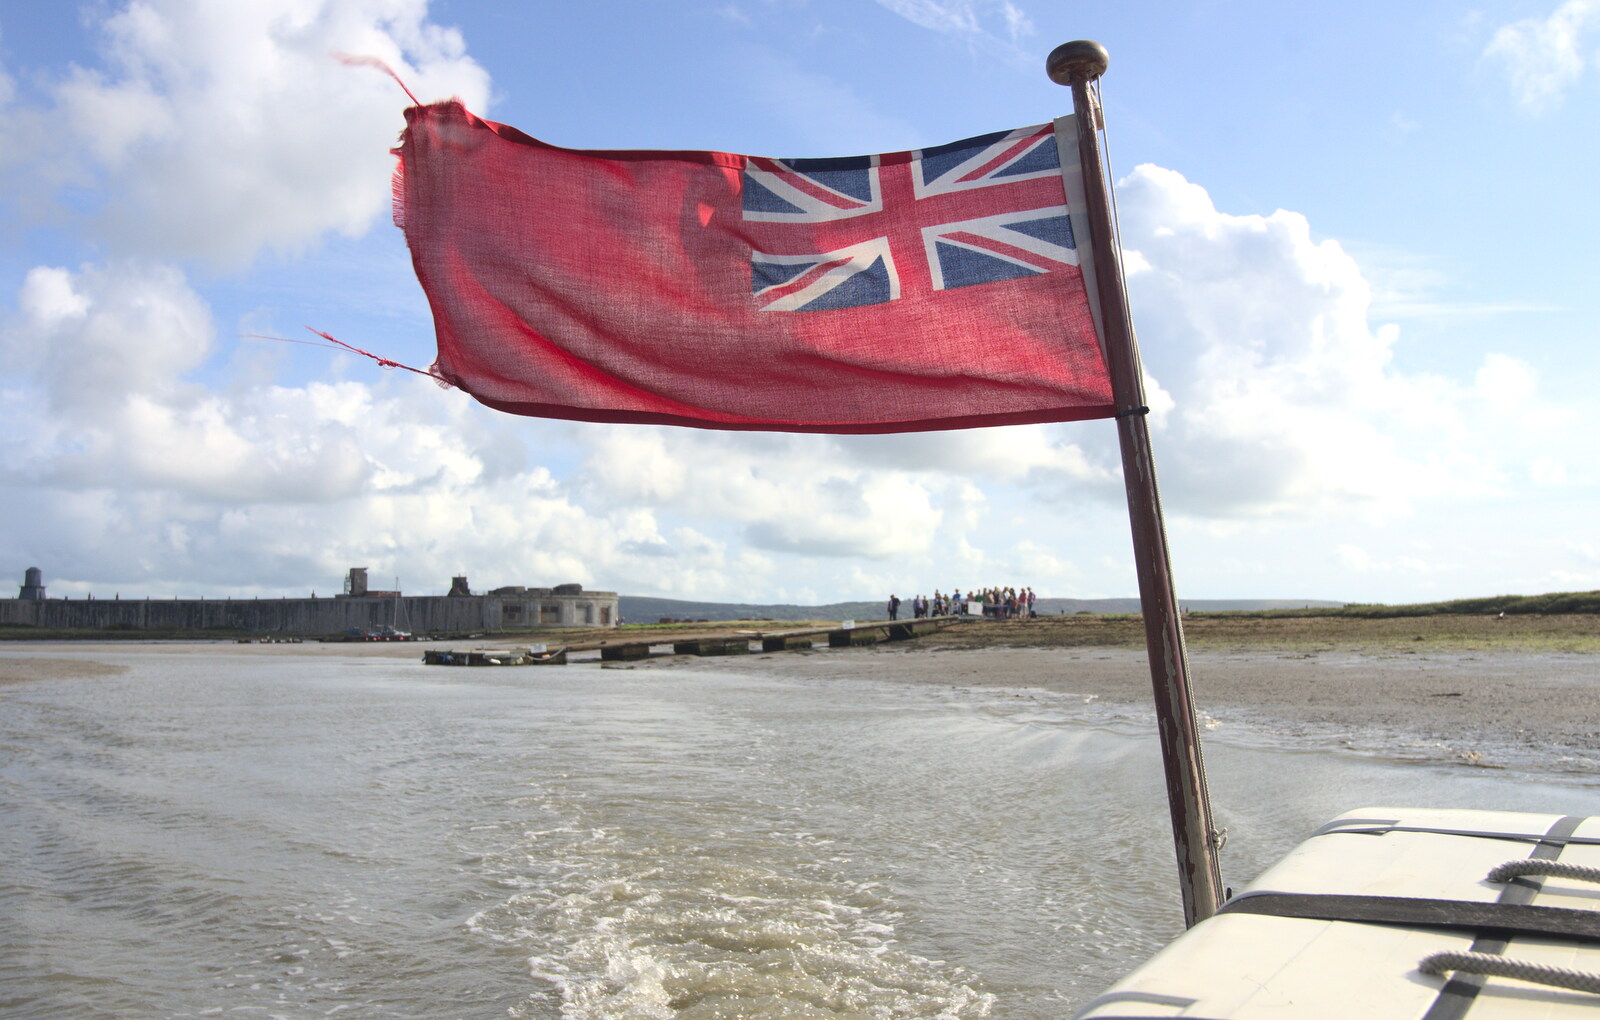 A tattered red ensign in the wind from A Trip to Hurst Castle, Keyhaven, Hampshire - 28th August 2015